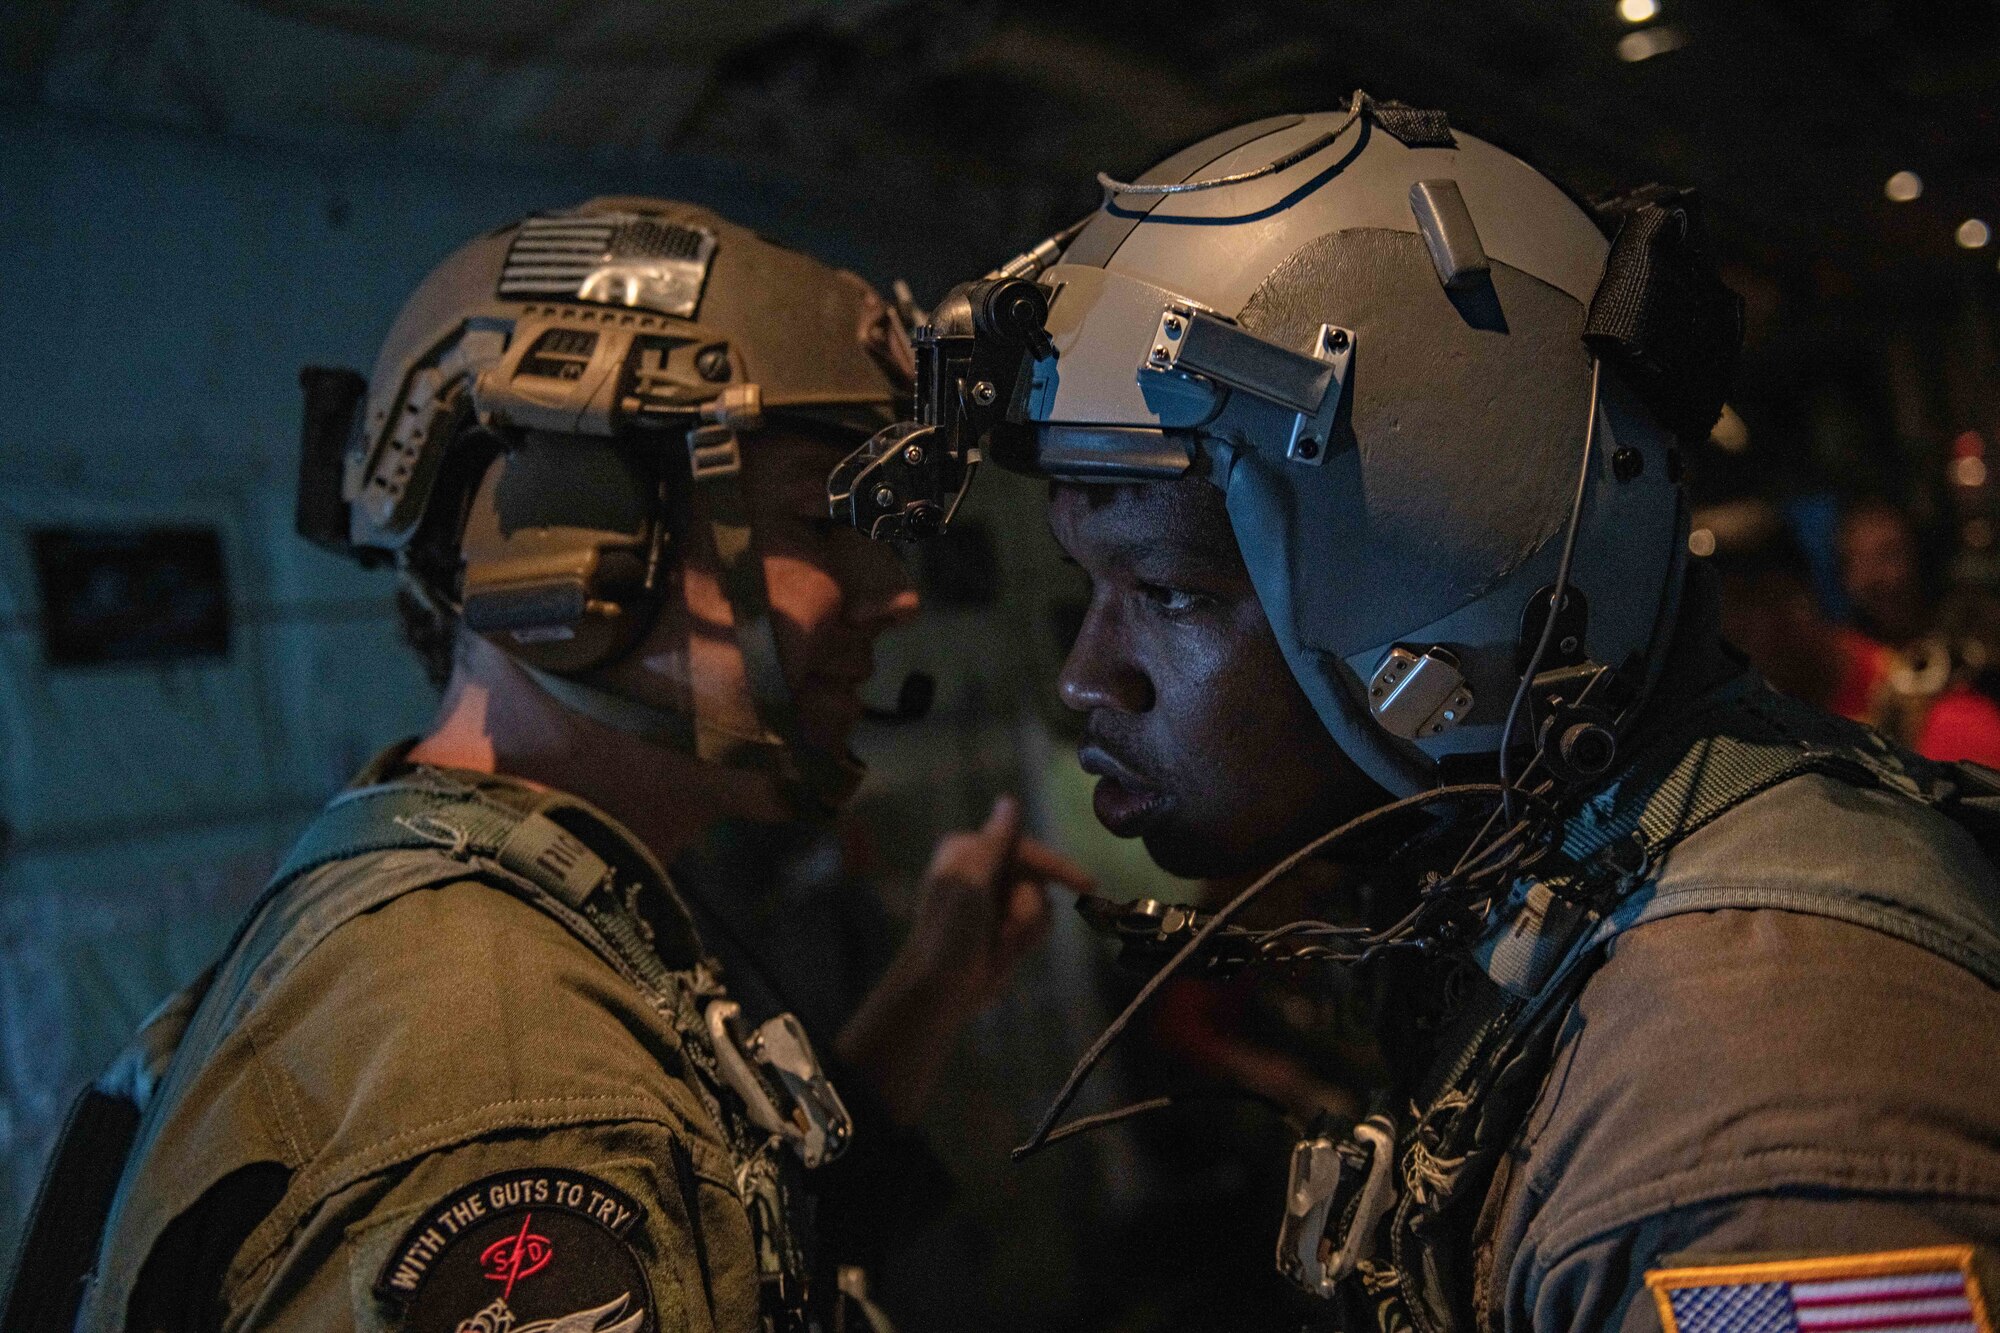 Two airmen discuss in the dark of the belly of the plane, the drop zone and plans to unload Airmen and gear safely.